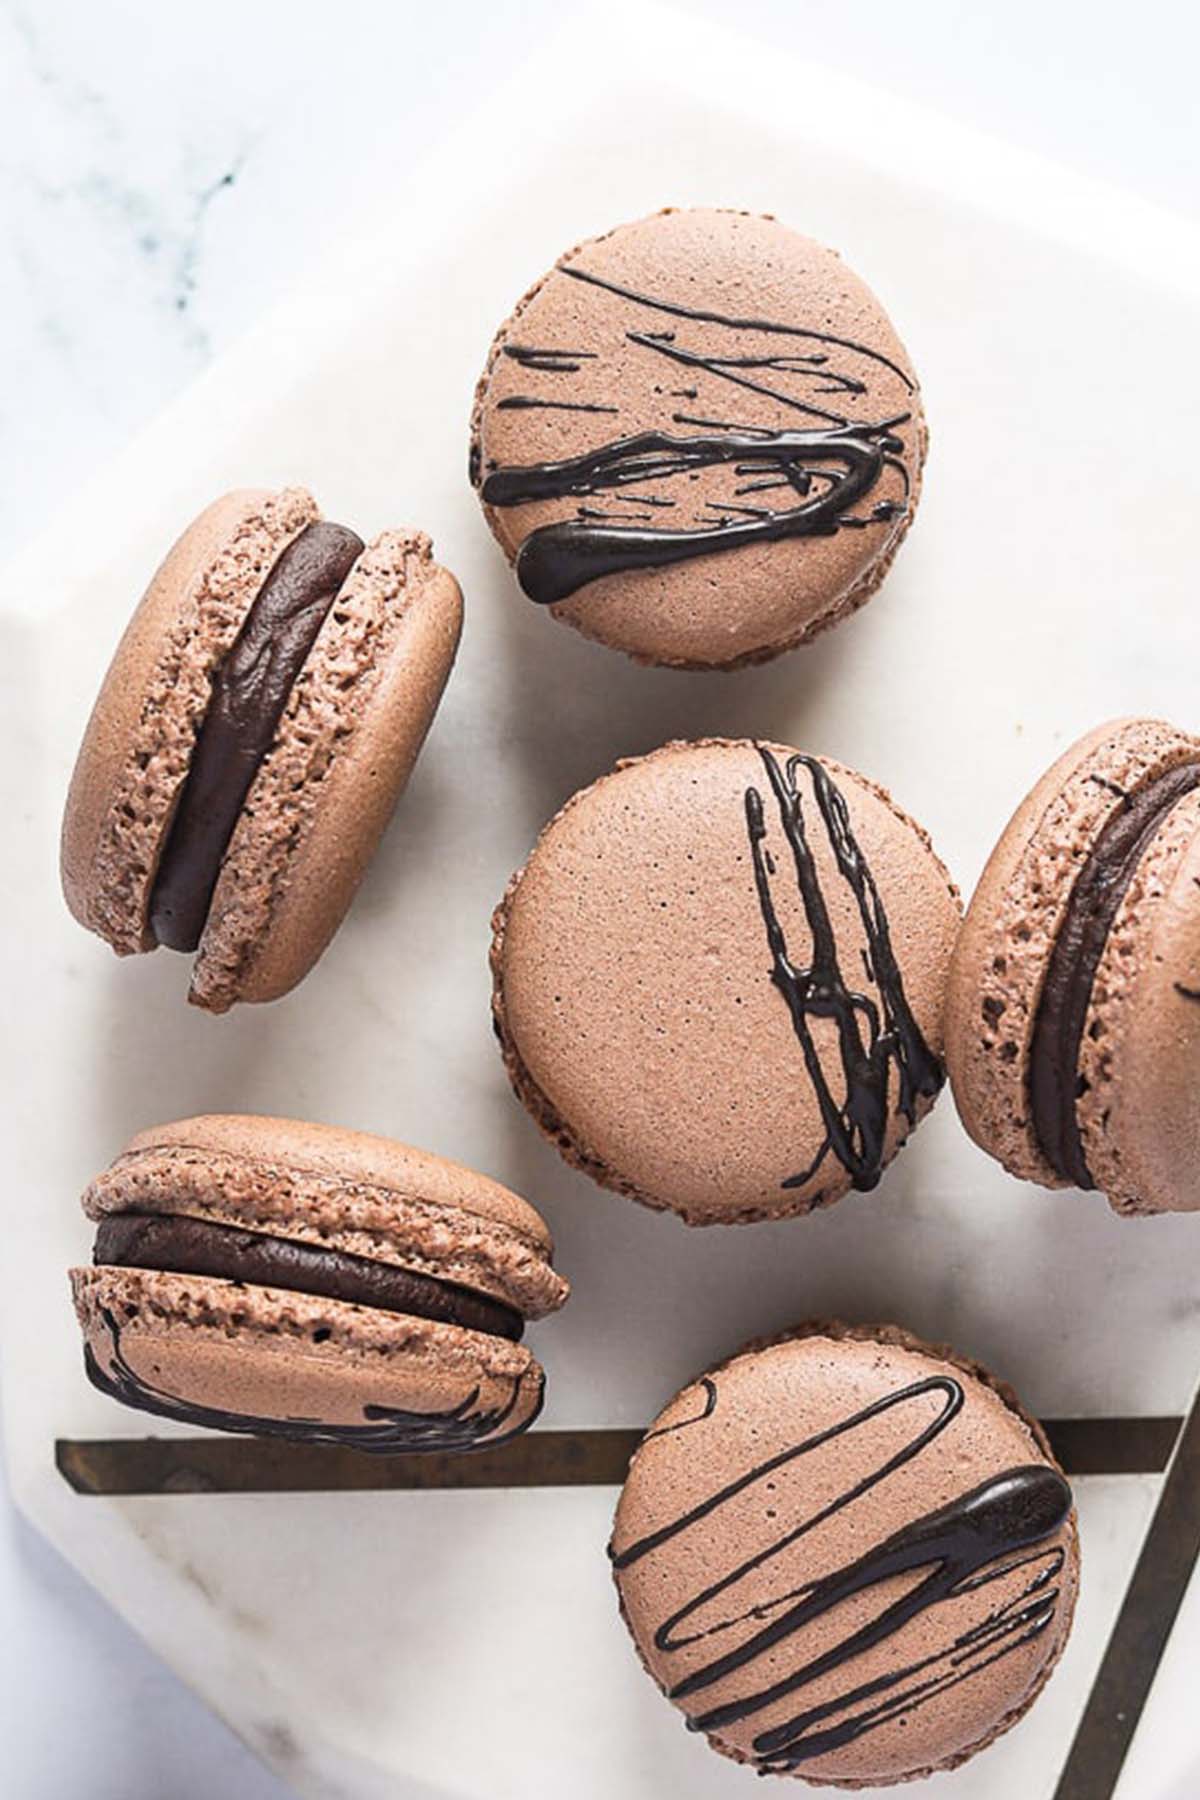 brown shelled macarons drizzled with dark chocolate.